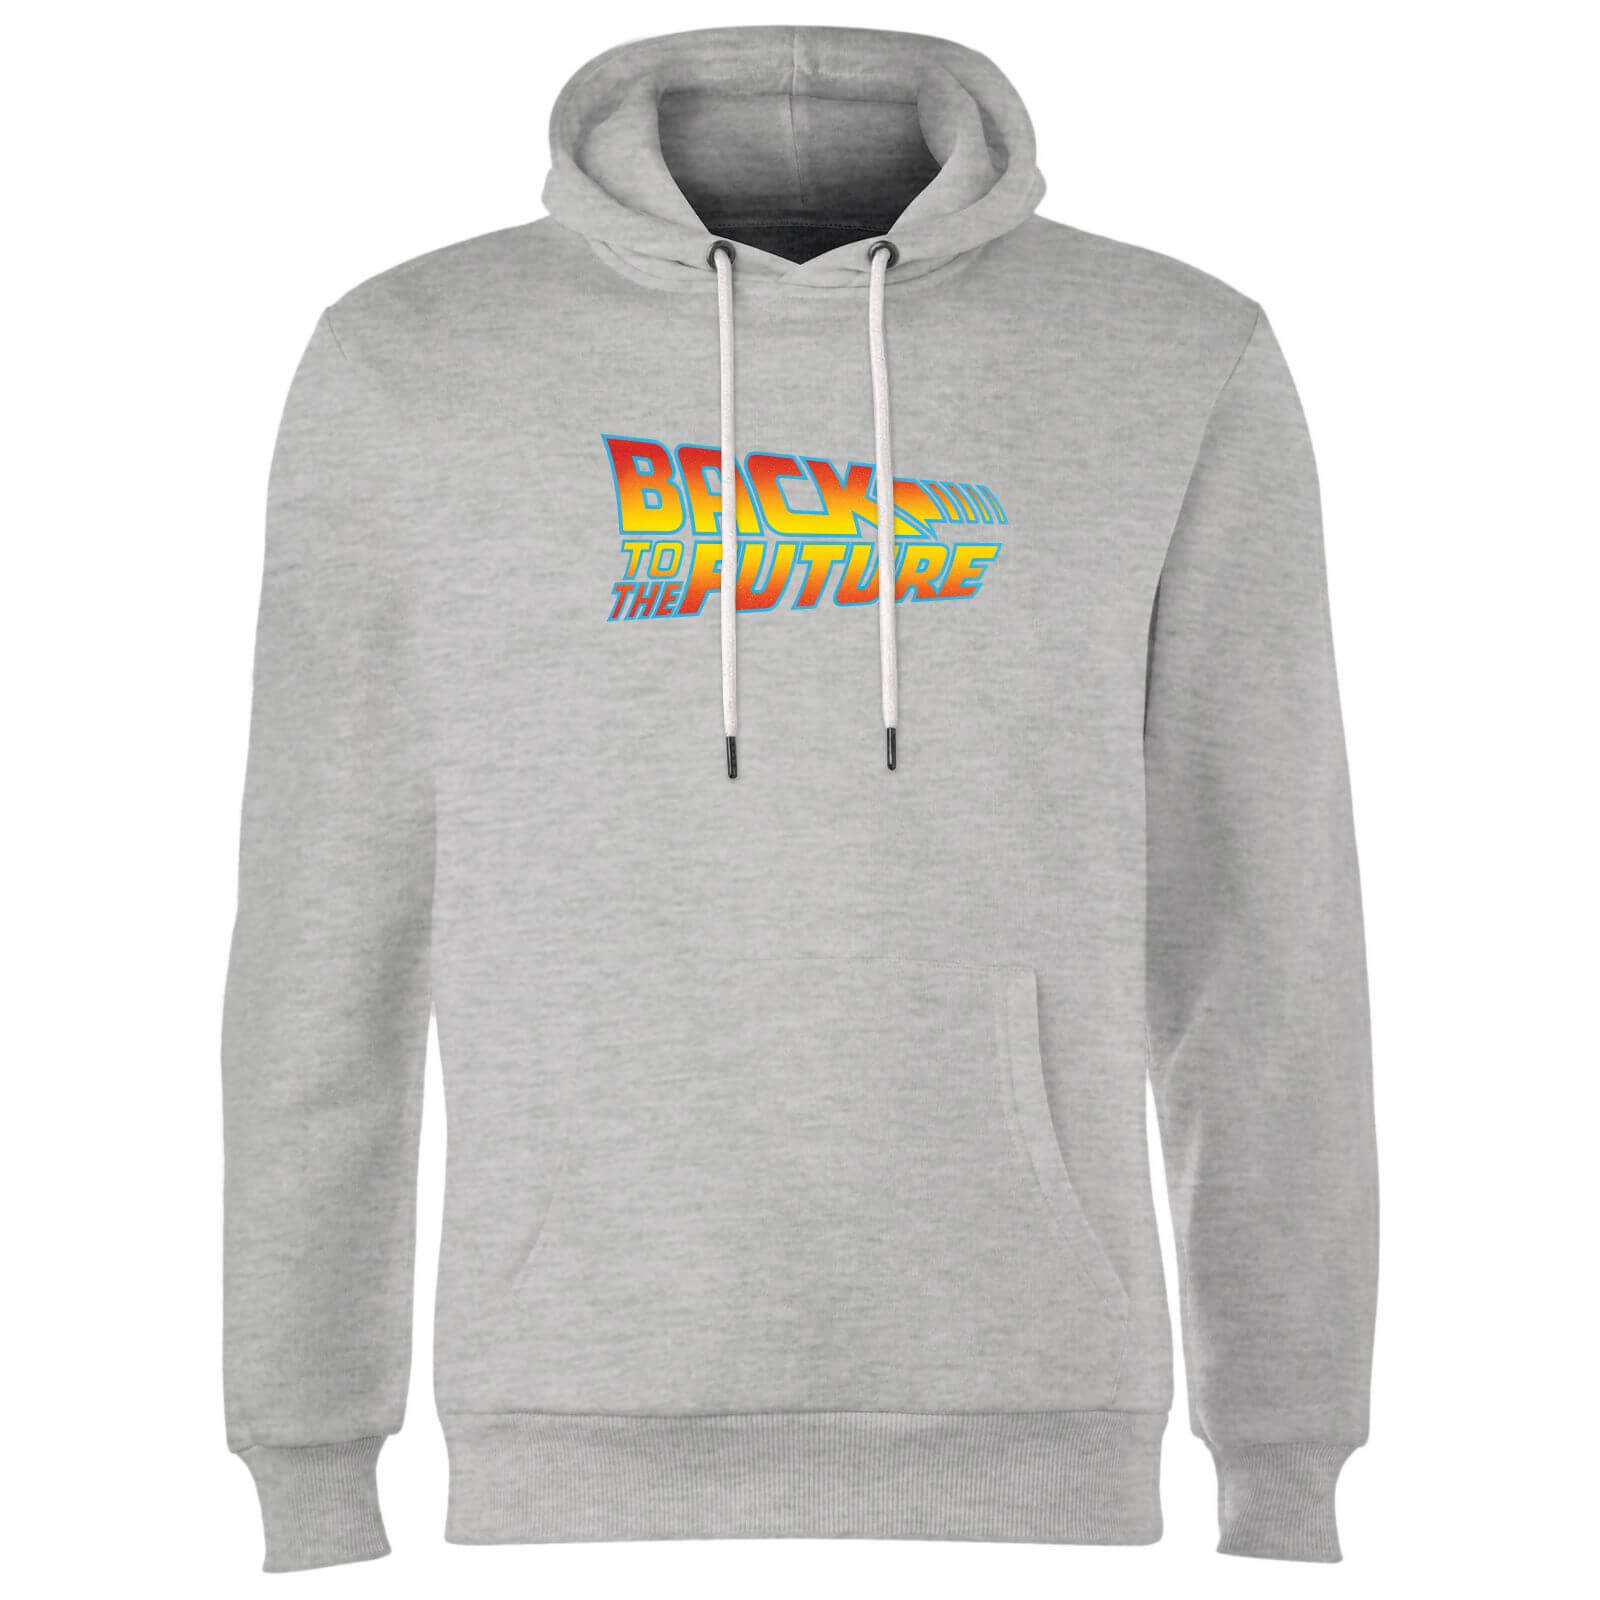 Back To The Future Classic Logo Hoodie - Grey - S - Grey